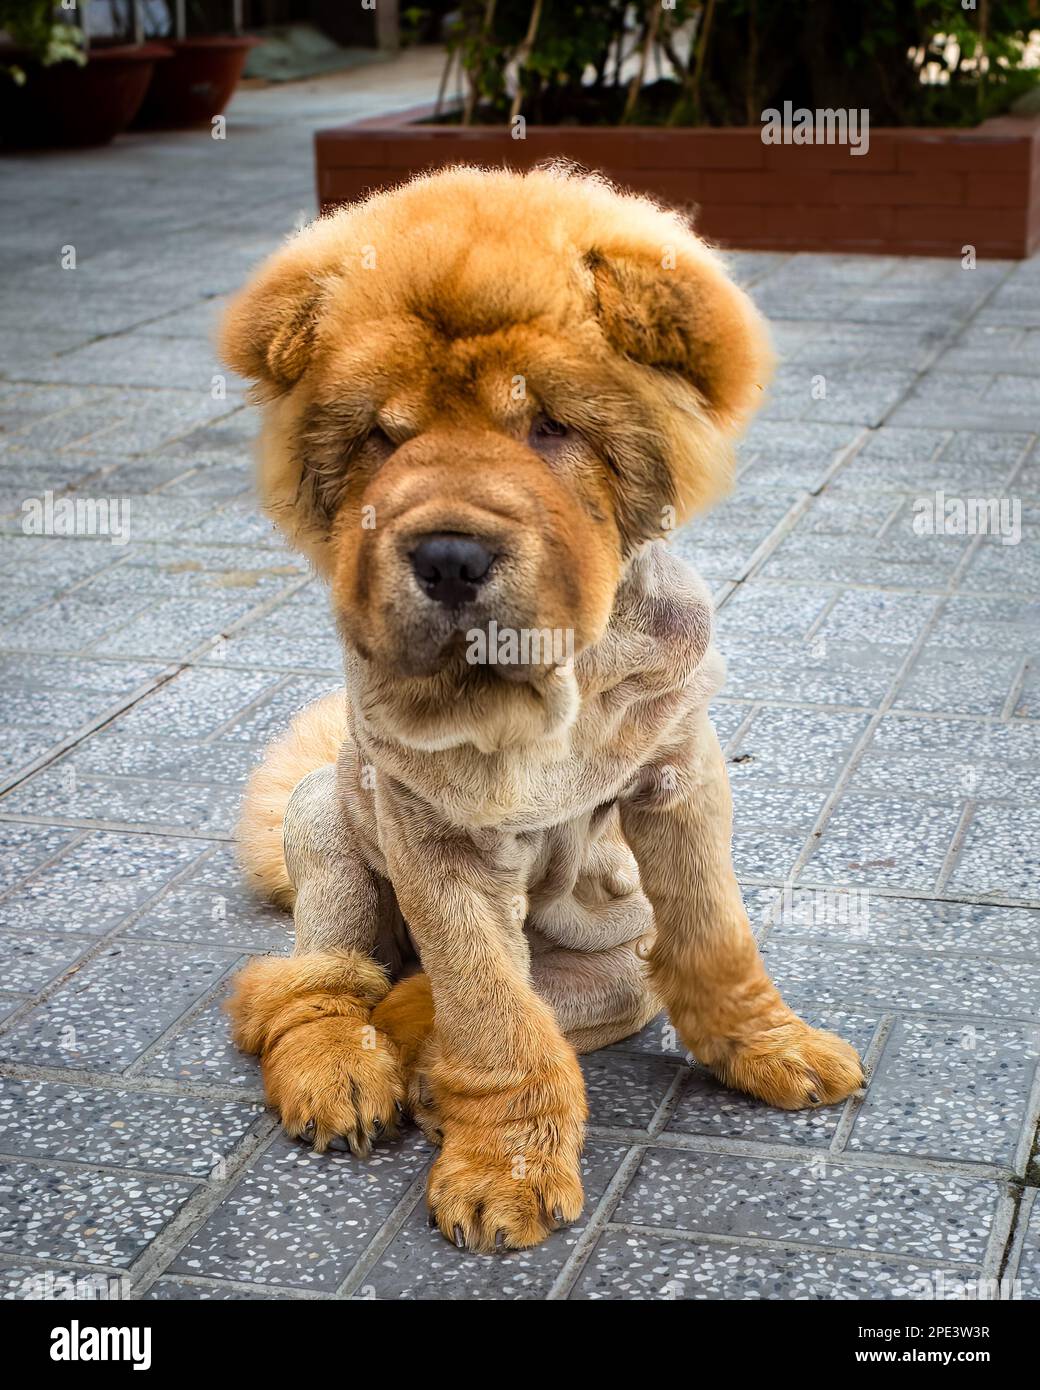 A Bear Coat Shar Pei, a type of Chinese Shar Pei dog, sits on the pavement in Long Xuyen, Vietnam. Stock Photo